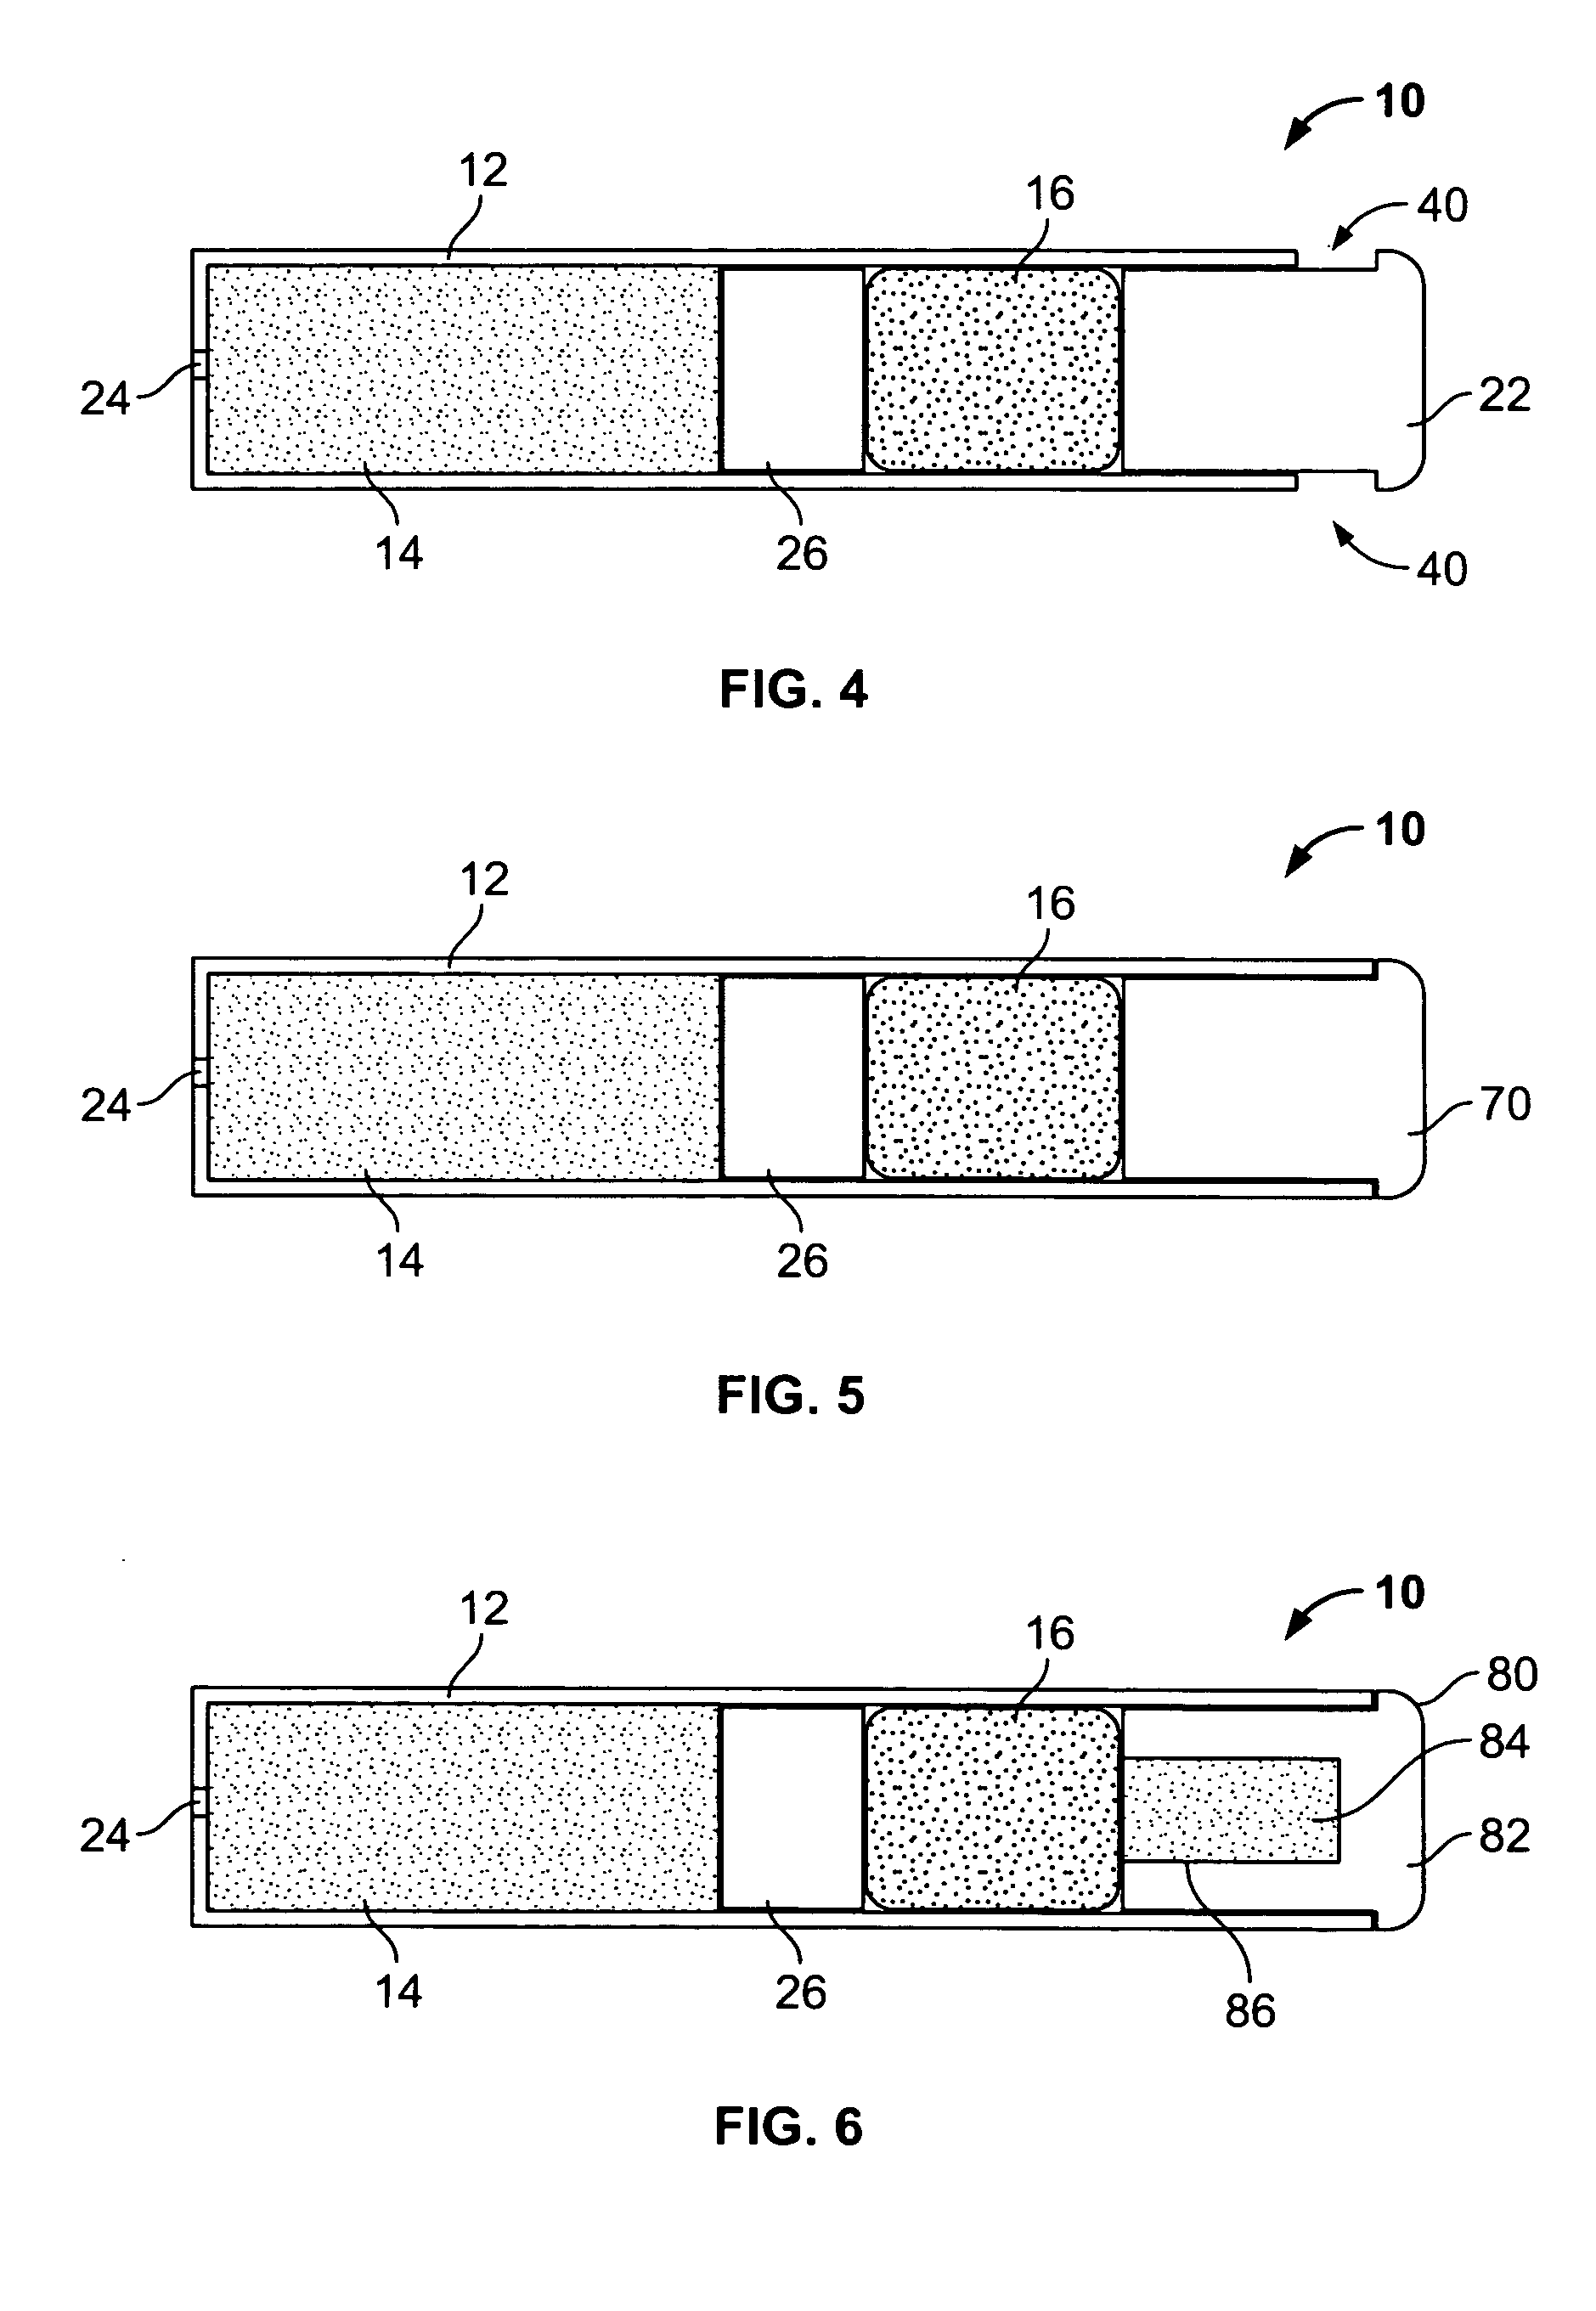 Osmotically driven active agent delivery device providing an ascending release profile